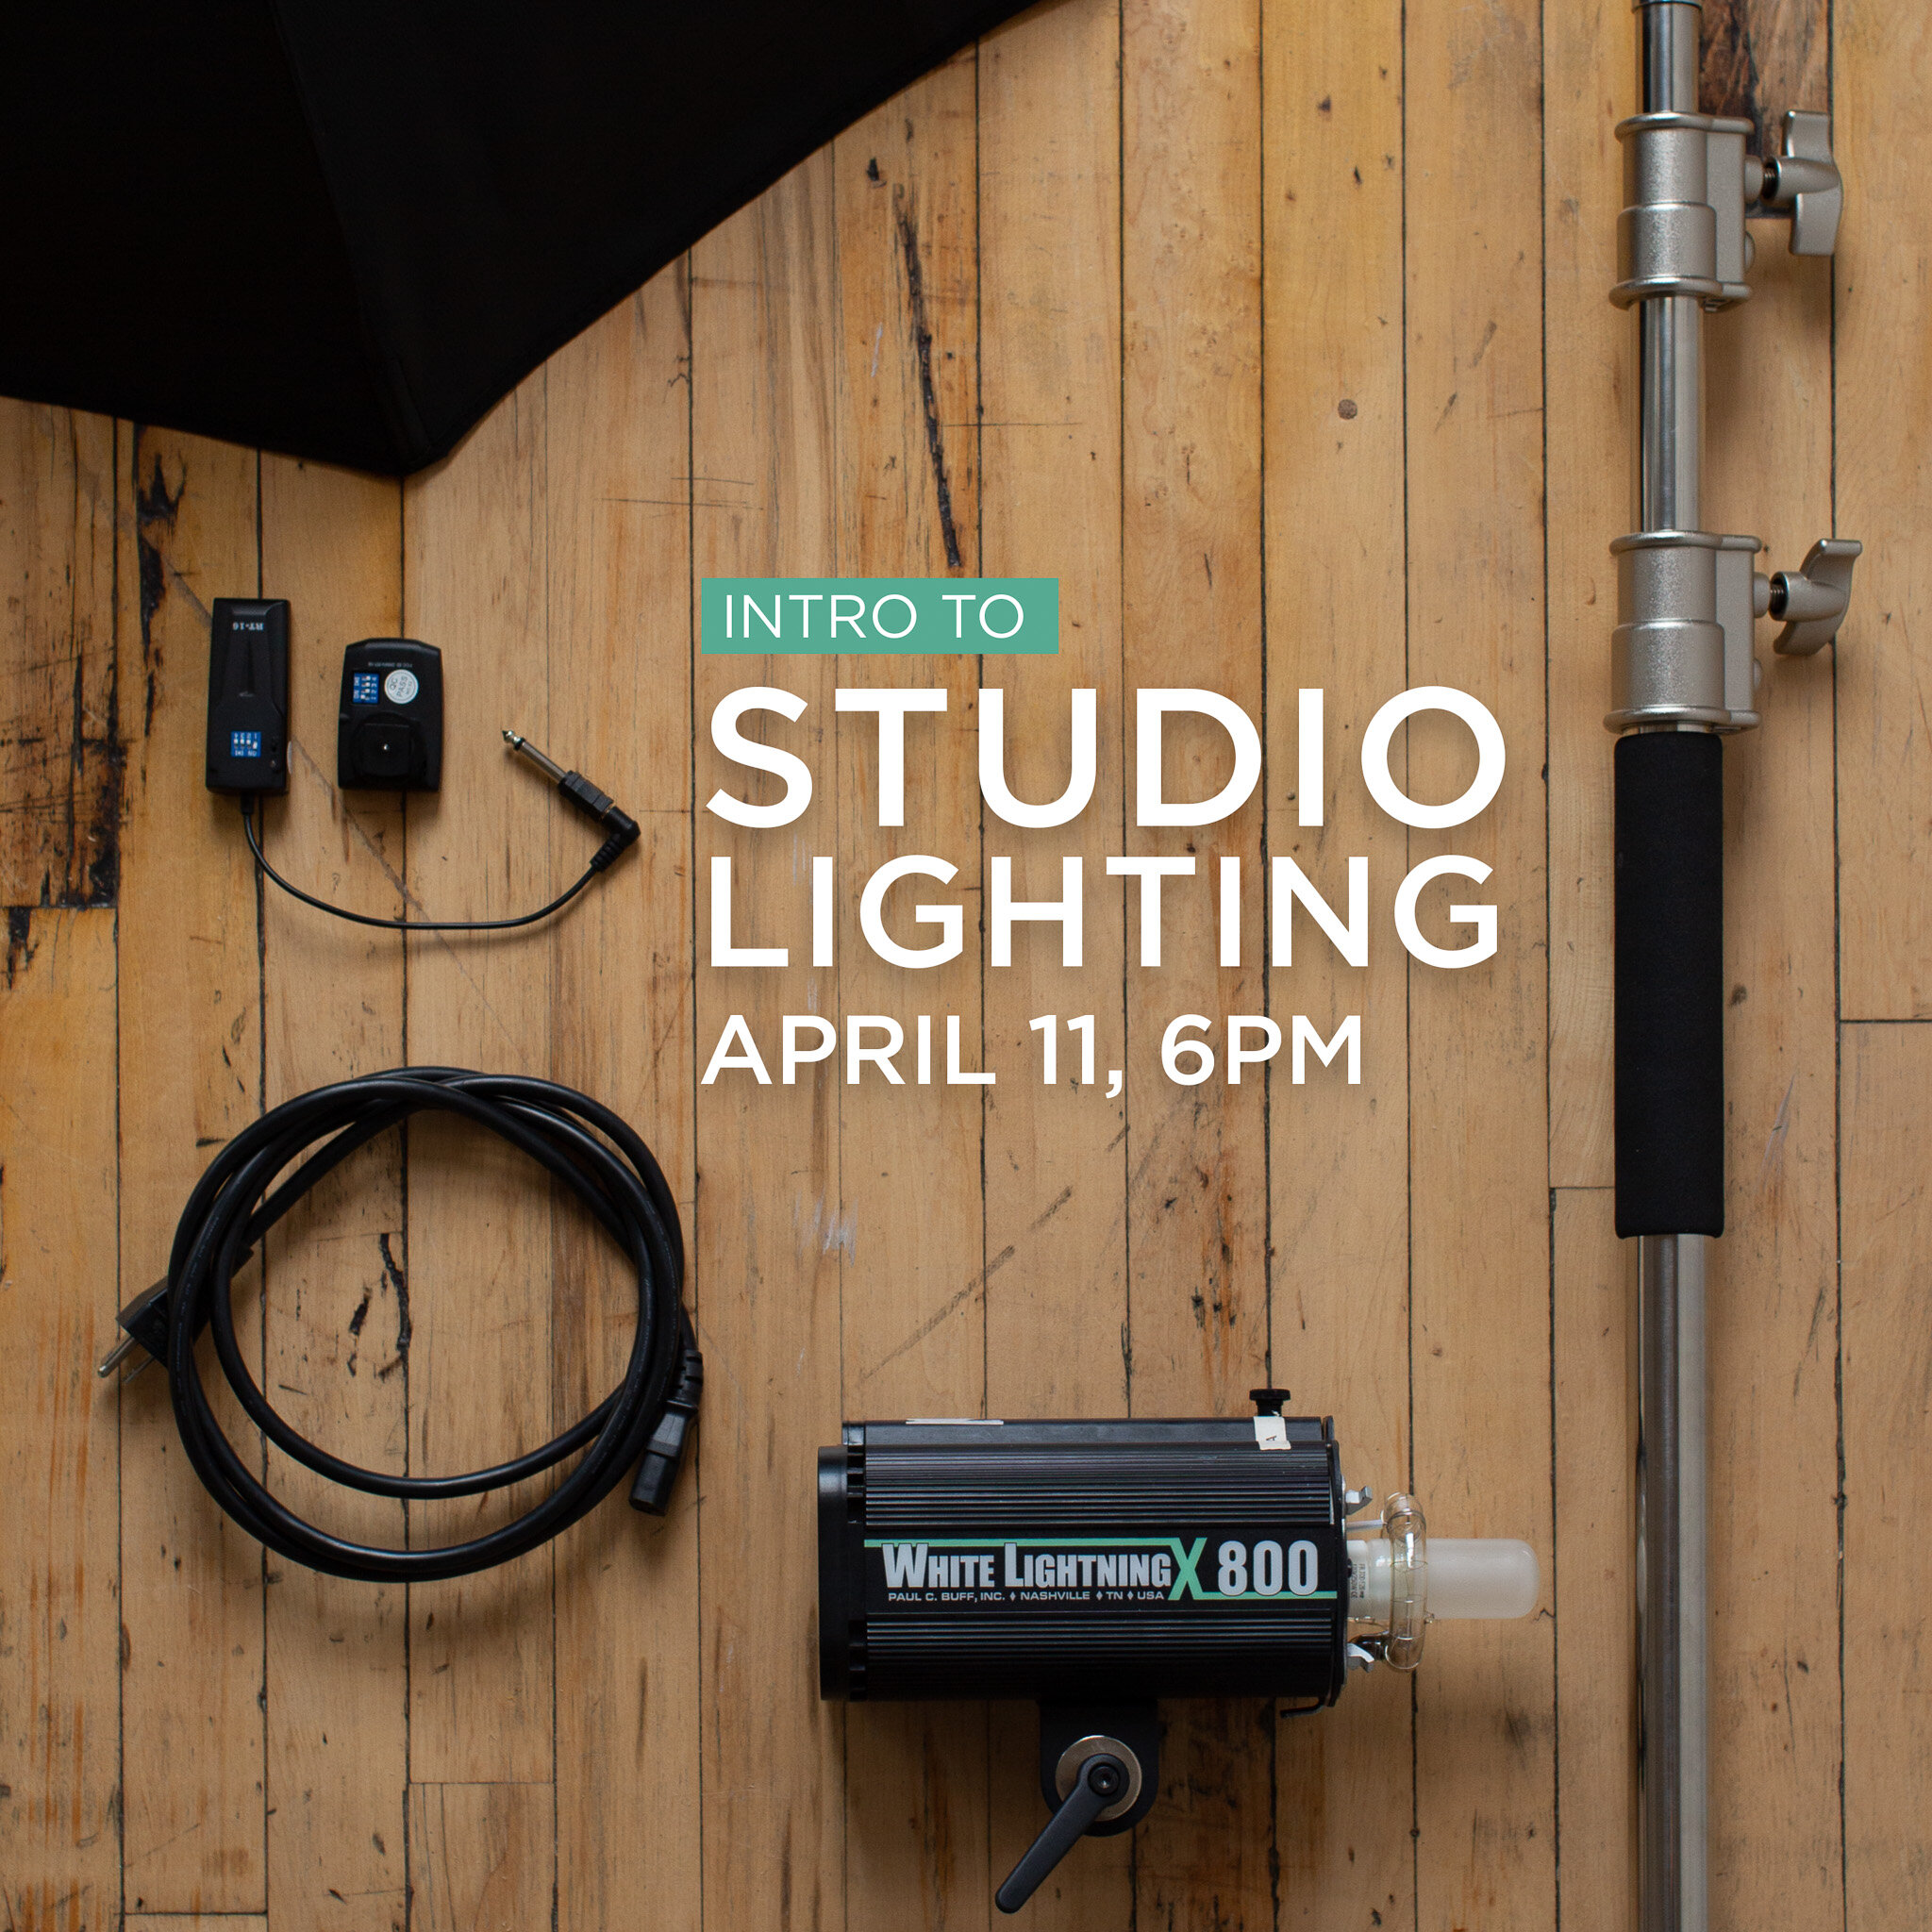 No sunlight for your shoot, and not sure how you can still create beautiful images for your client? We got you covered! Our next Intro To Studio Lighting class is on April 11 @ 6PM. Learn a simplified method of approaching studio lighting so you can 